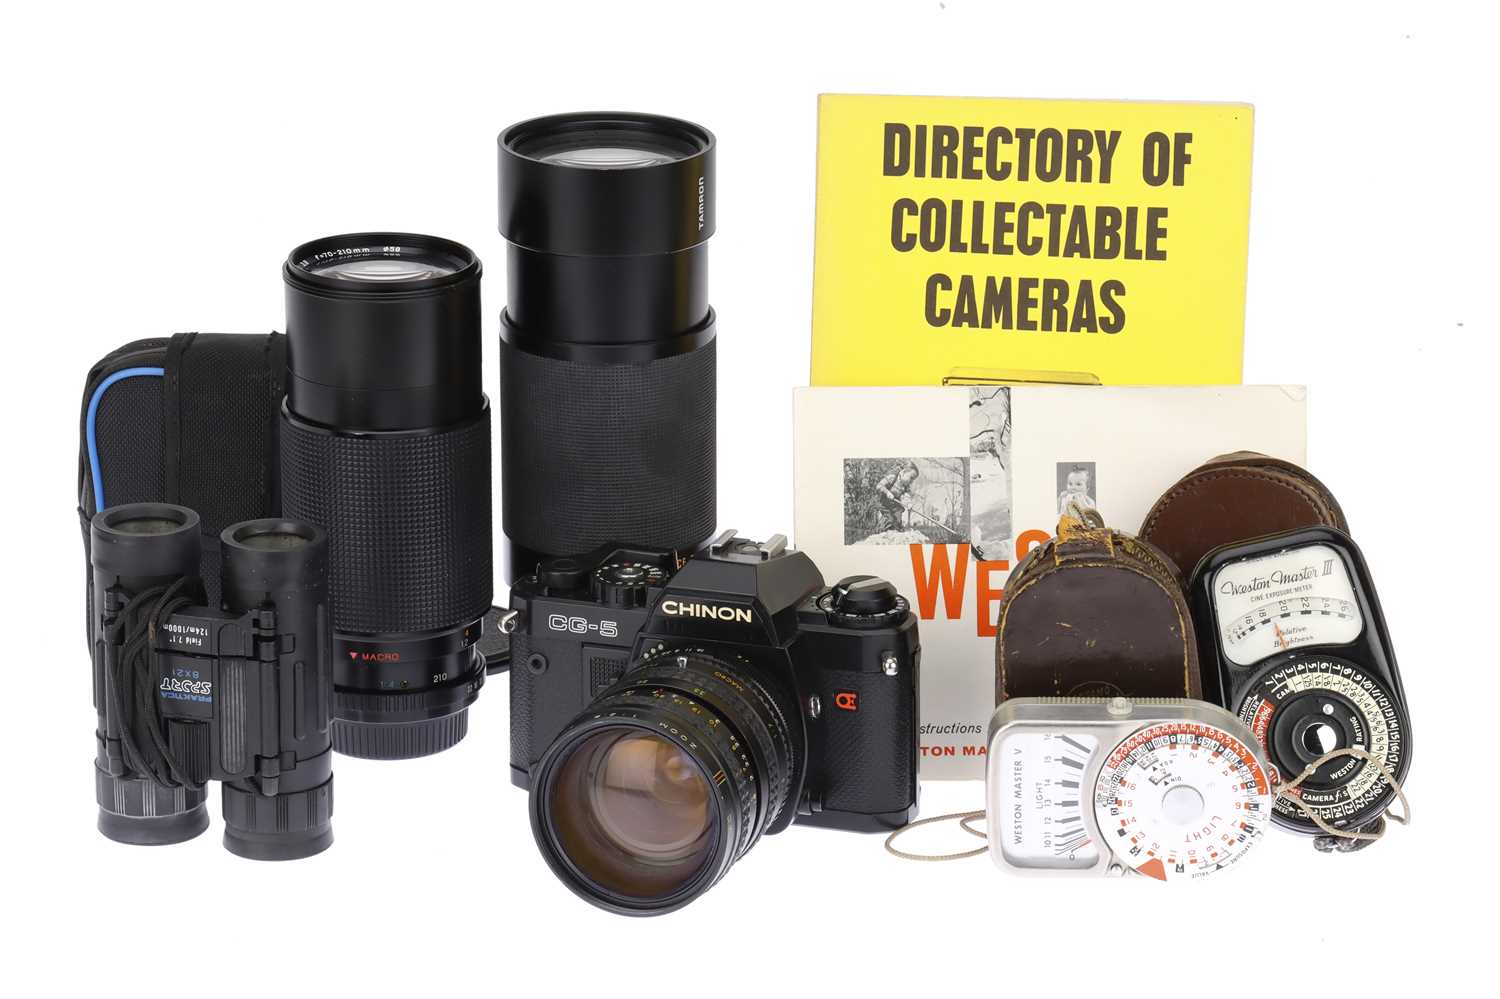 Lot 92 - A Chinon CG-5 35mm SLR Camera and Other Items